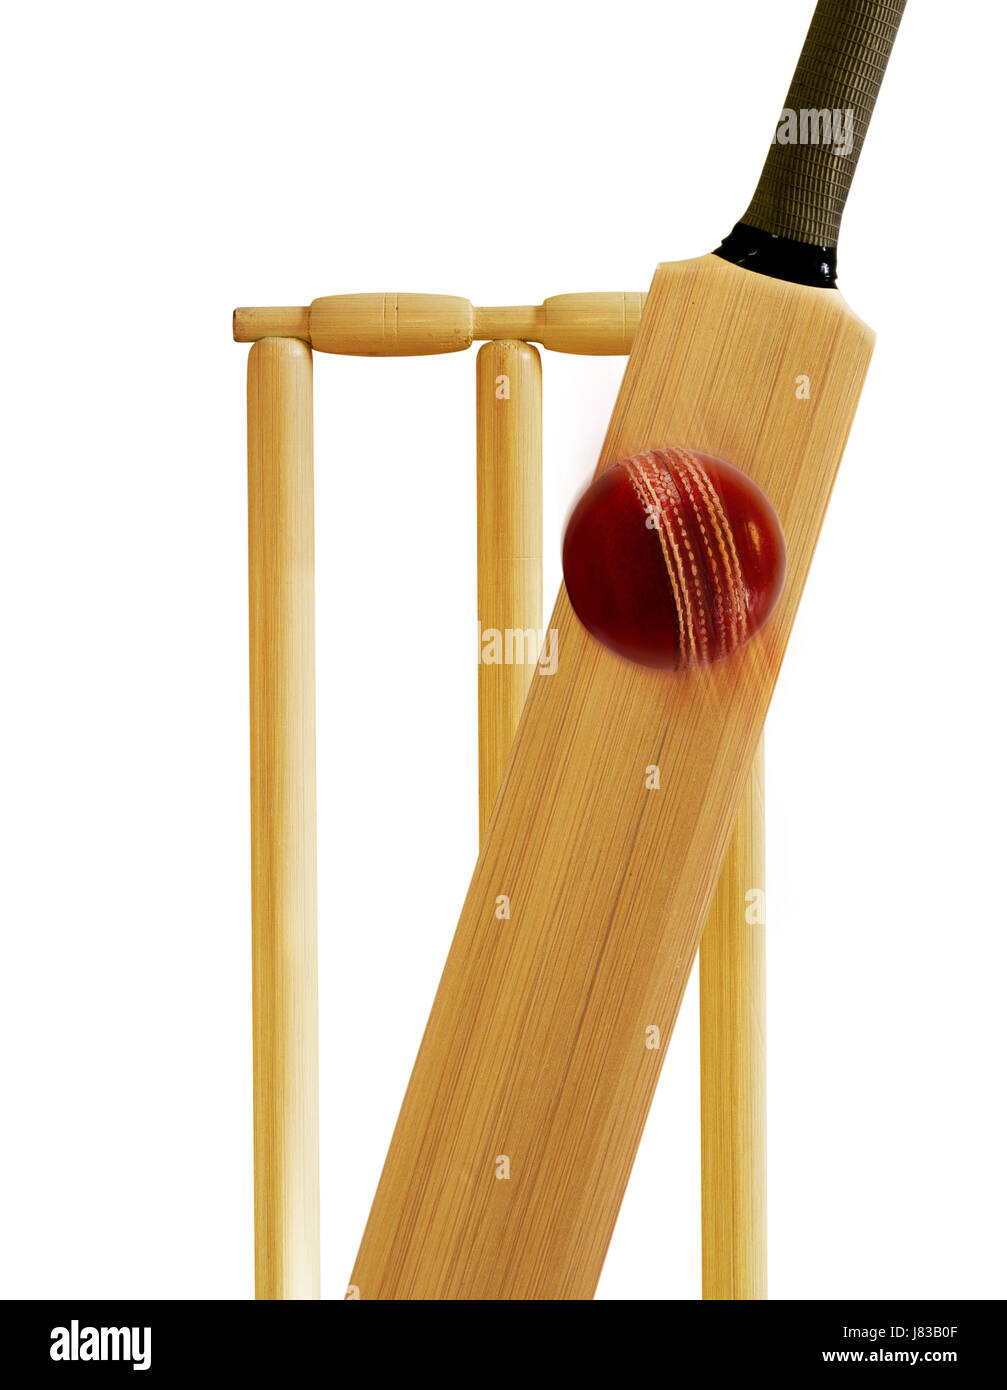 ball bat match red cricket objects detail spare time free time leisure leisure Stock Photo